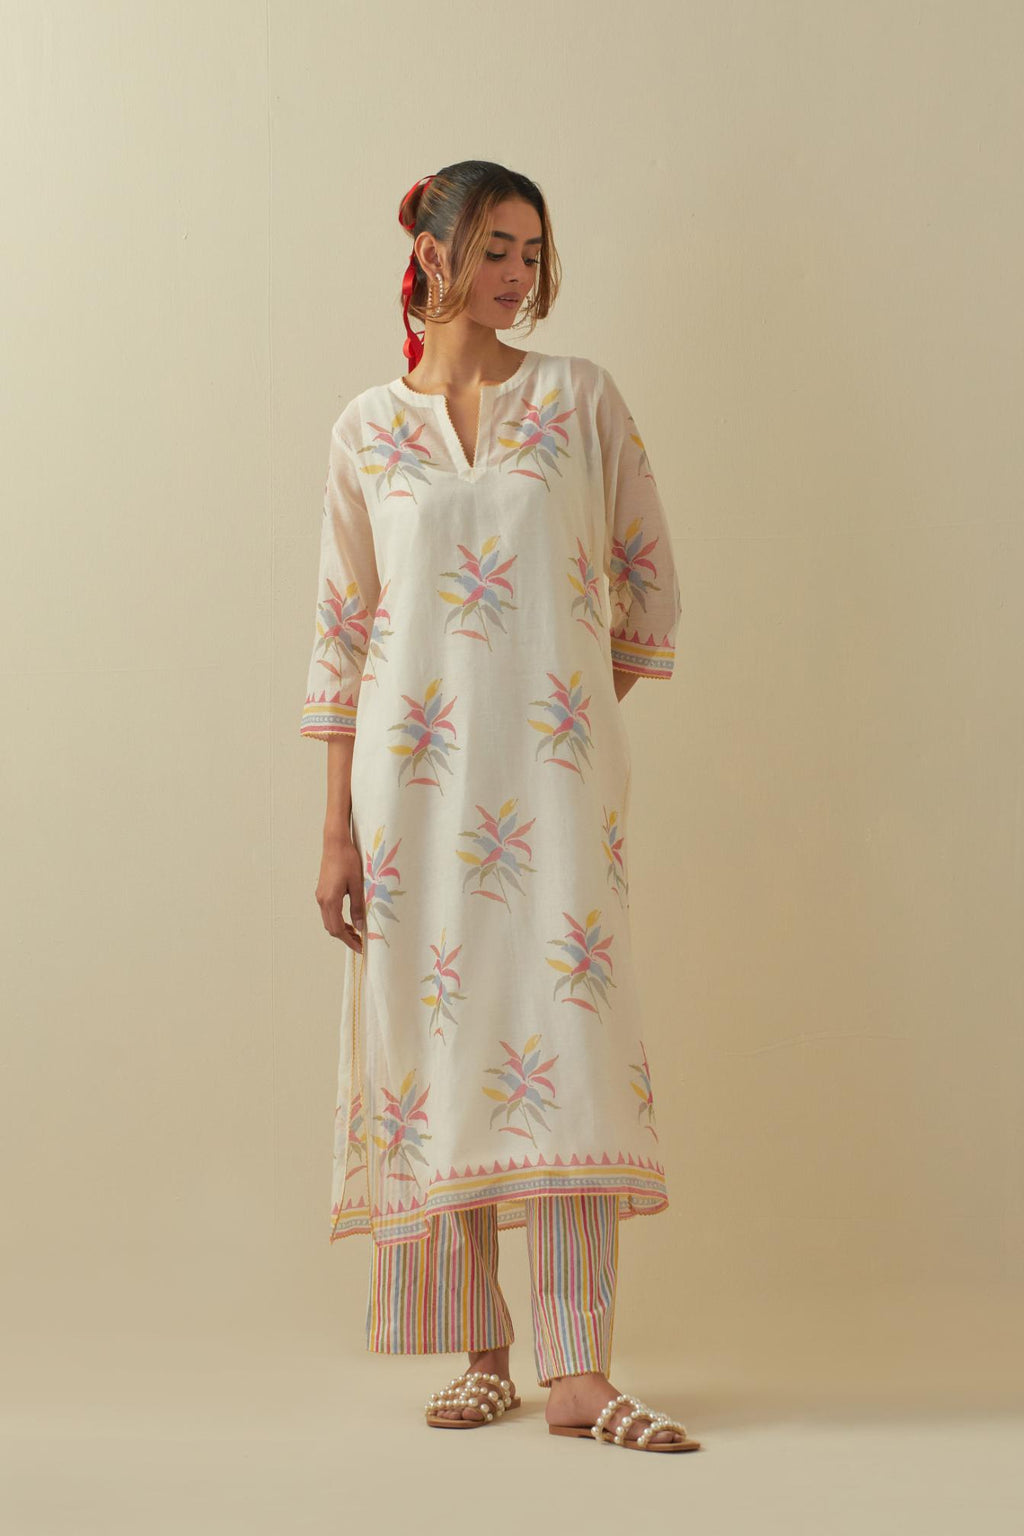 Off white cotton chanderi hand block printed kurta set with all-over multi colored flower boota.